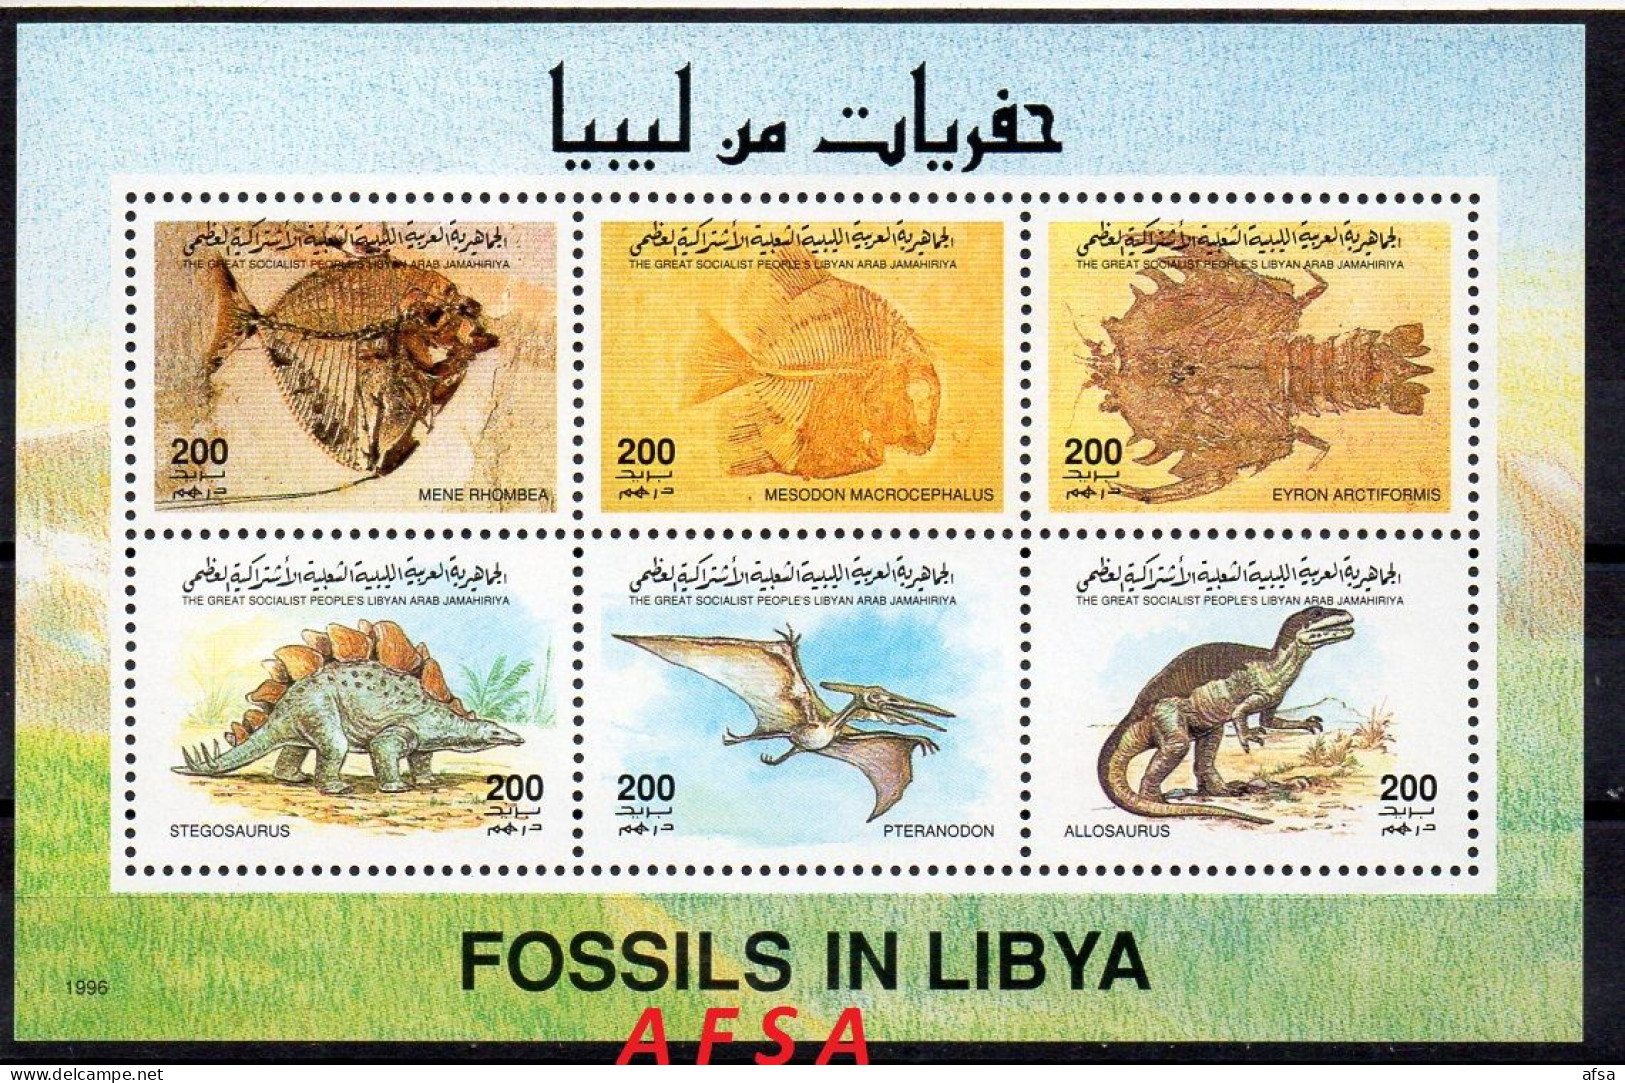 Libya 1996-Fossils And Dinosaurs-MNH** //  Libye 1996-Fossiles Et Dinosaures-Neuf** - Fossilien